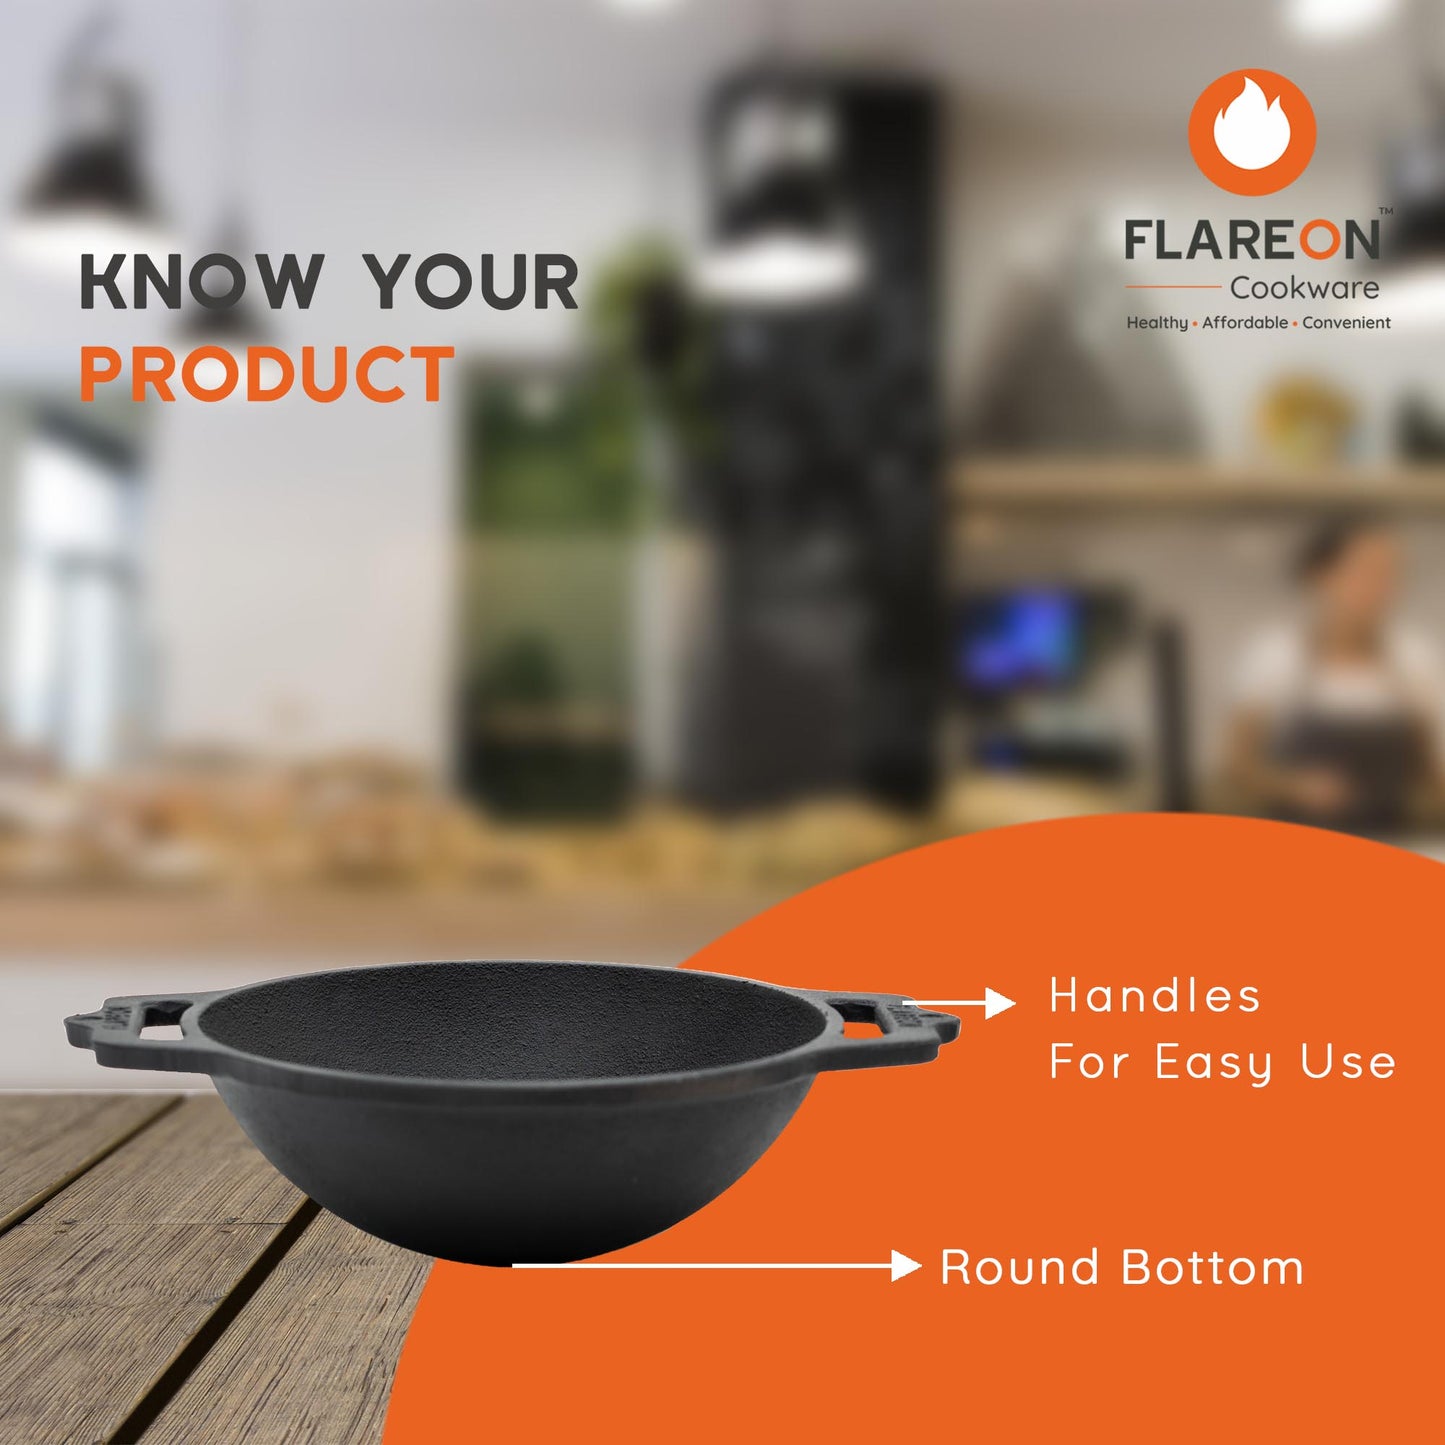 FlareOn's Cast Iron Kadai 8-Inch- Know Your Product